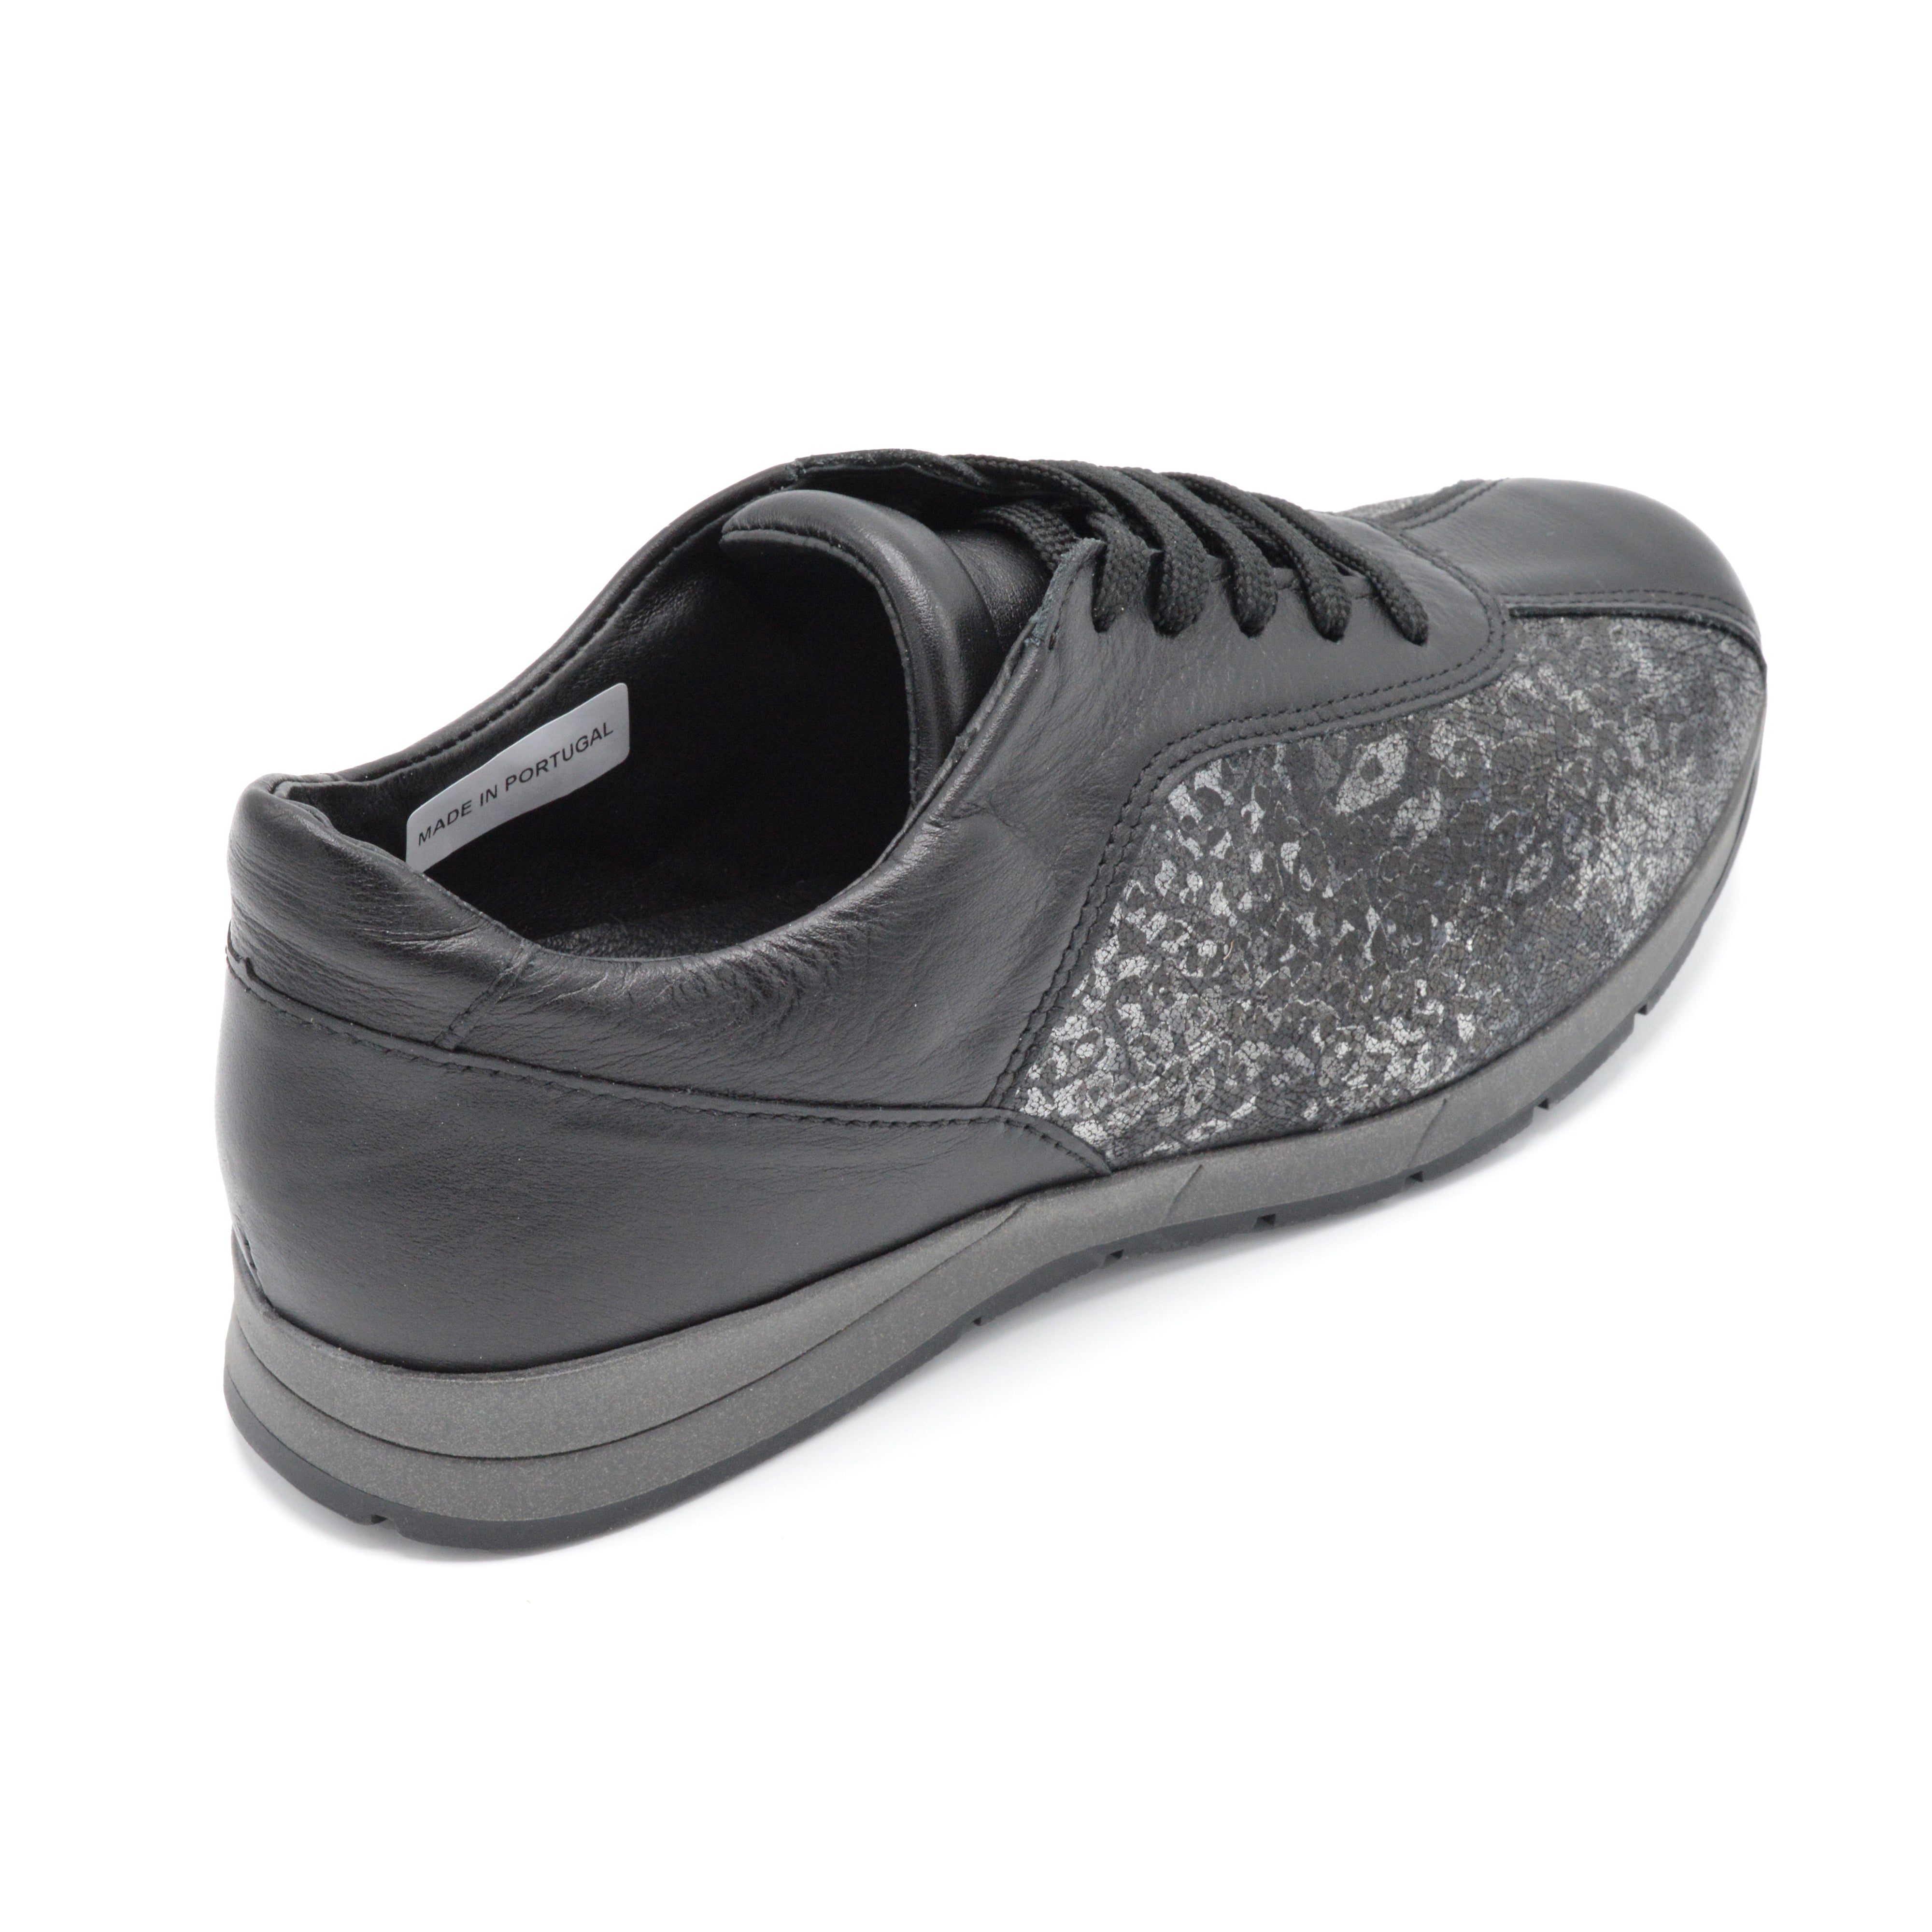 Ladies Wide Fit Walking Shoe For Bunions